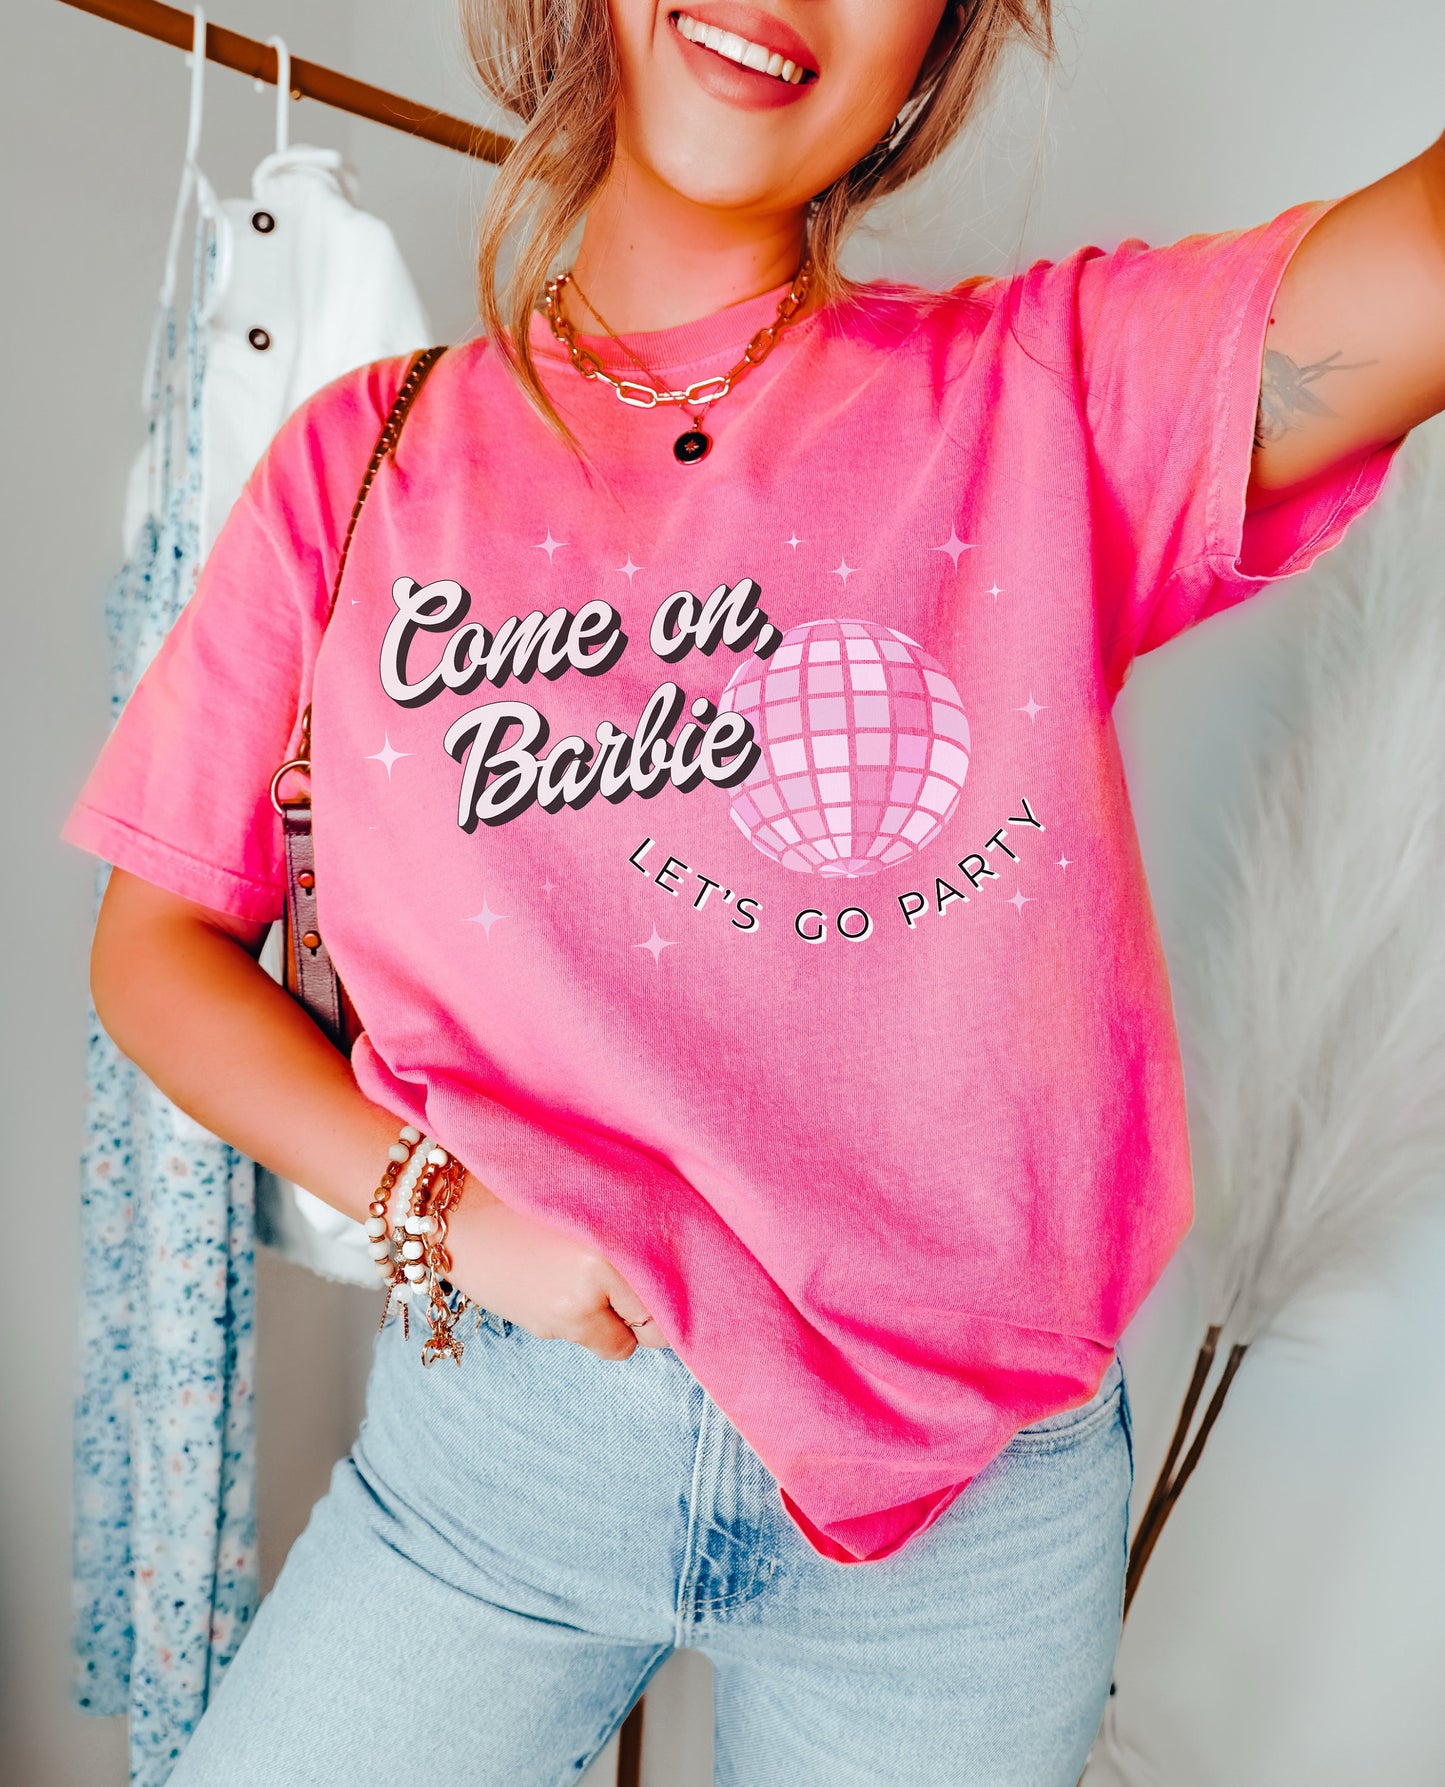 Barbie Movie Shirt, Come On Let's Go Party Shirt, Birthday Party Shirt, Birthday Crew Shirt, Girls Shirt, Birthday Gift Shirt, Disco Barbie